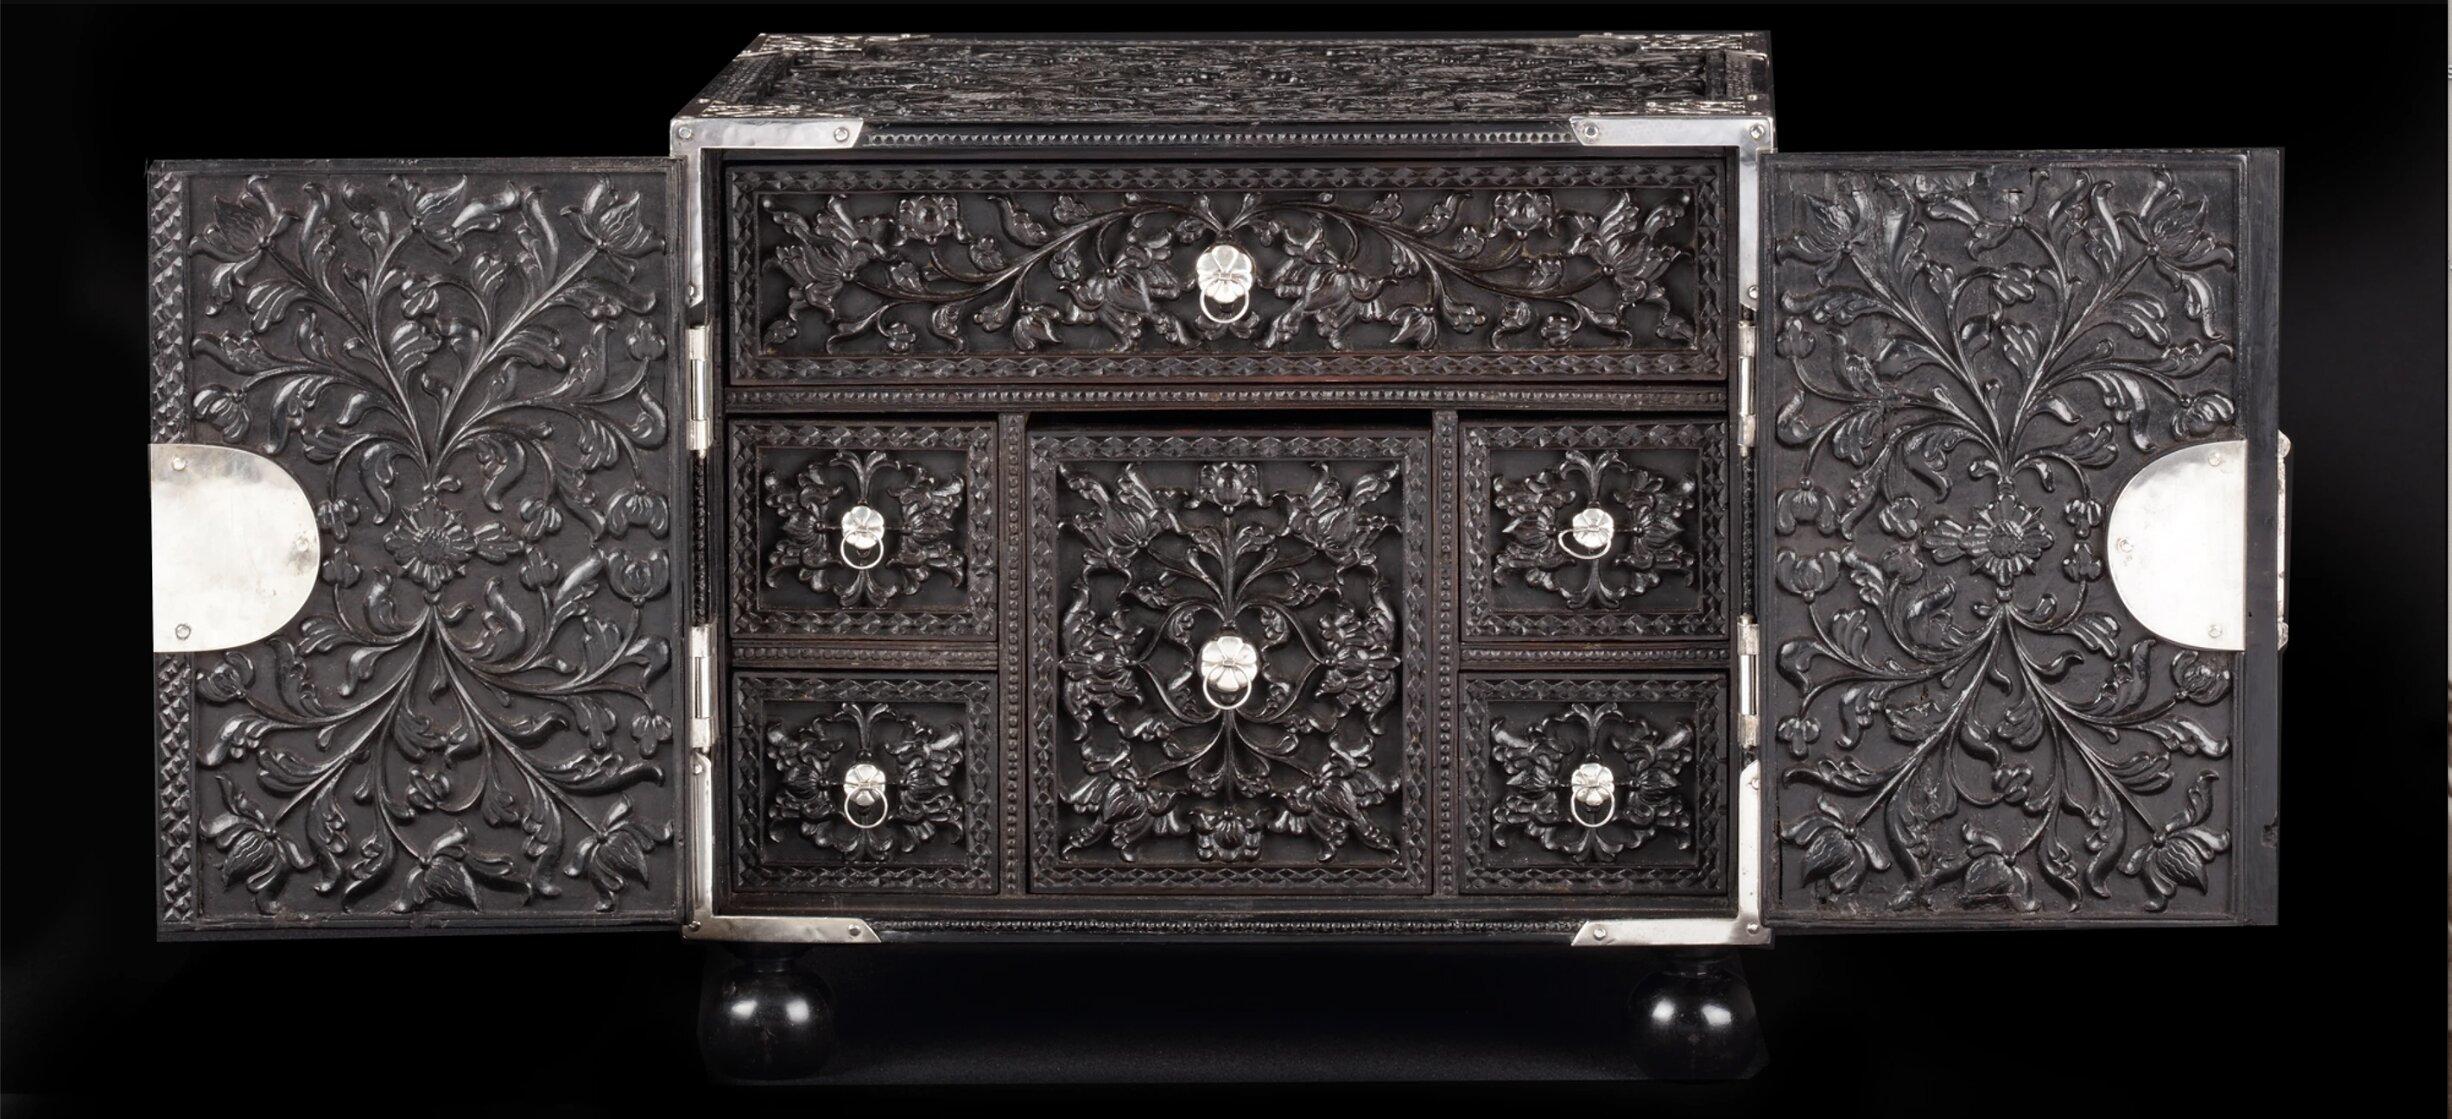 A splendid Dutch-colonial Sinhalese ebony two-door cabinet with silver mounts

Sri Lanka, Kandy, 2nd half 17th century, the mounts later

The cabinet with a central drawer with hidden compartment and the top drawer divided into four compartments.